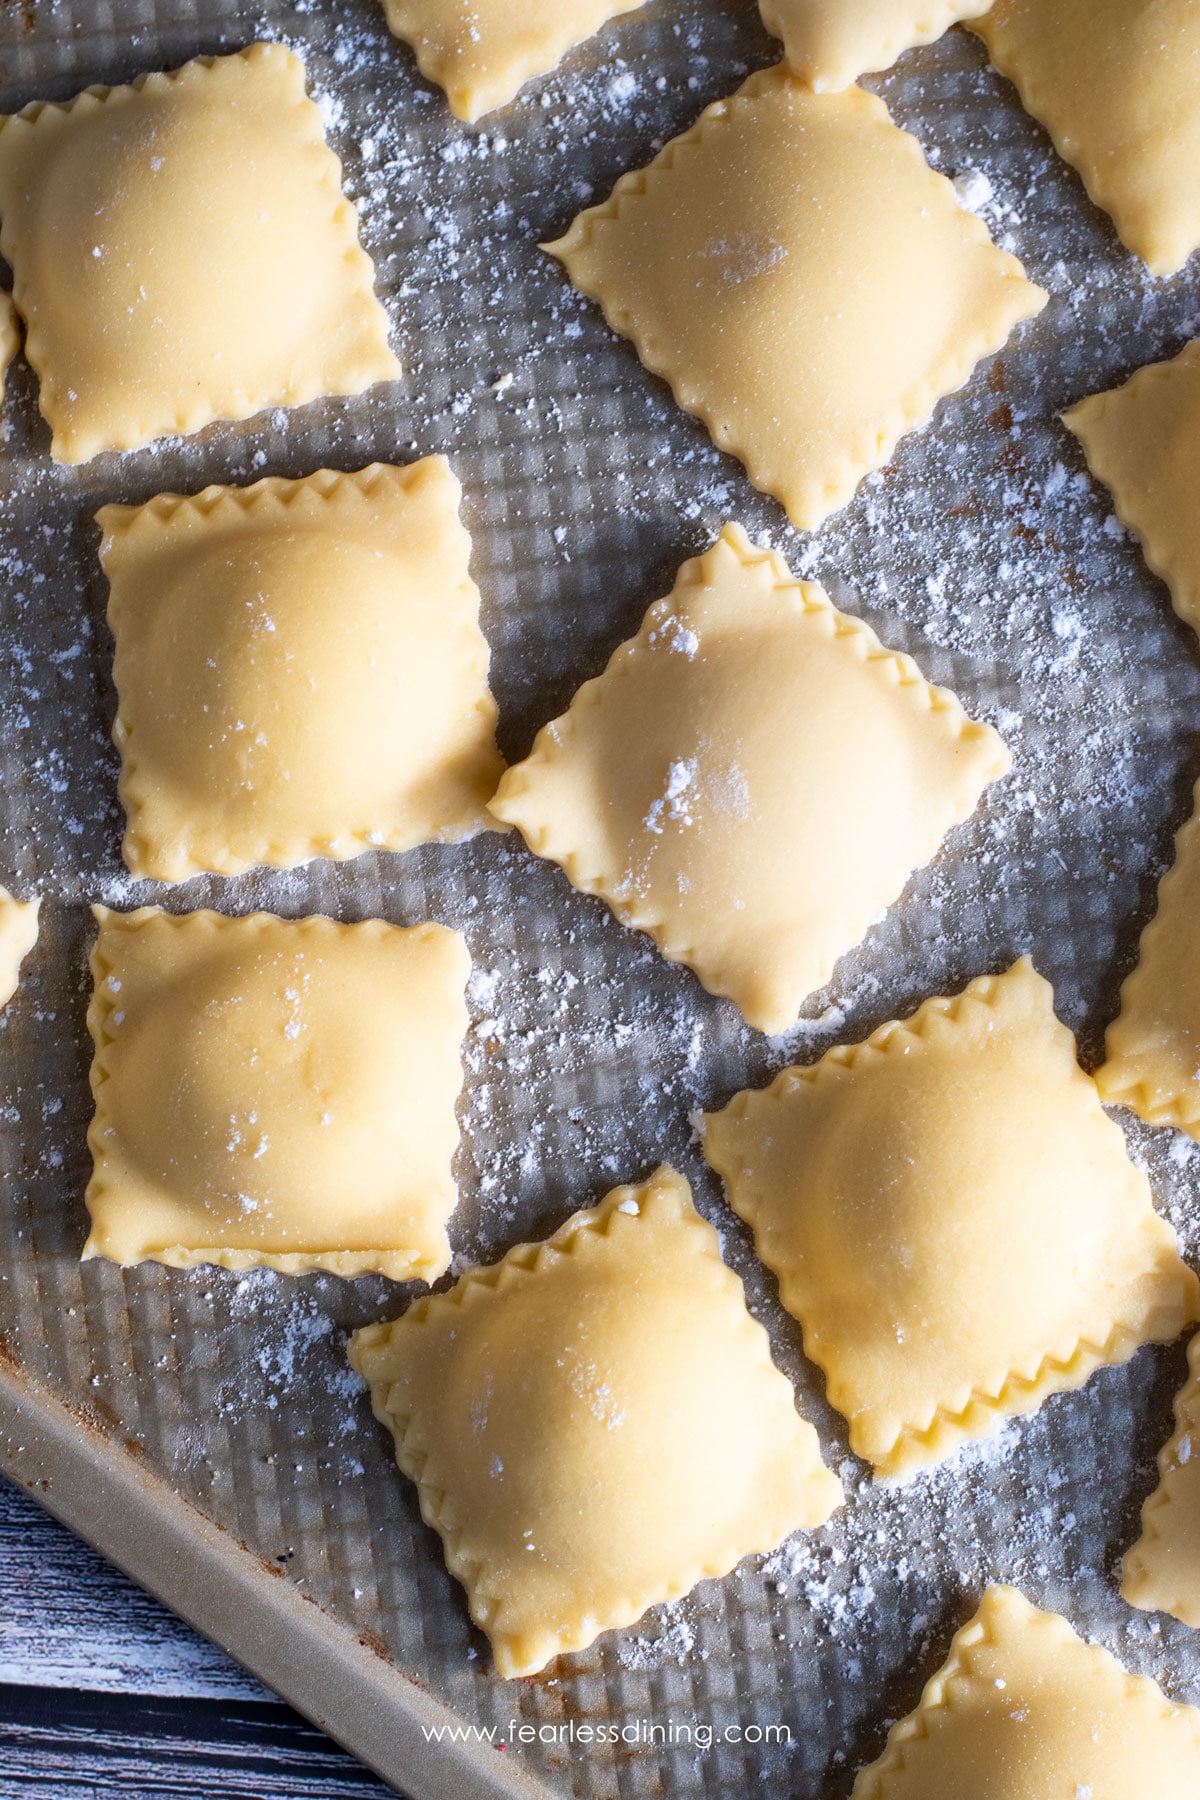 Uncooked ravioli on a tray.